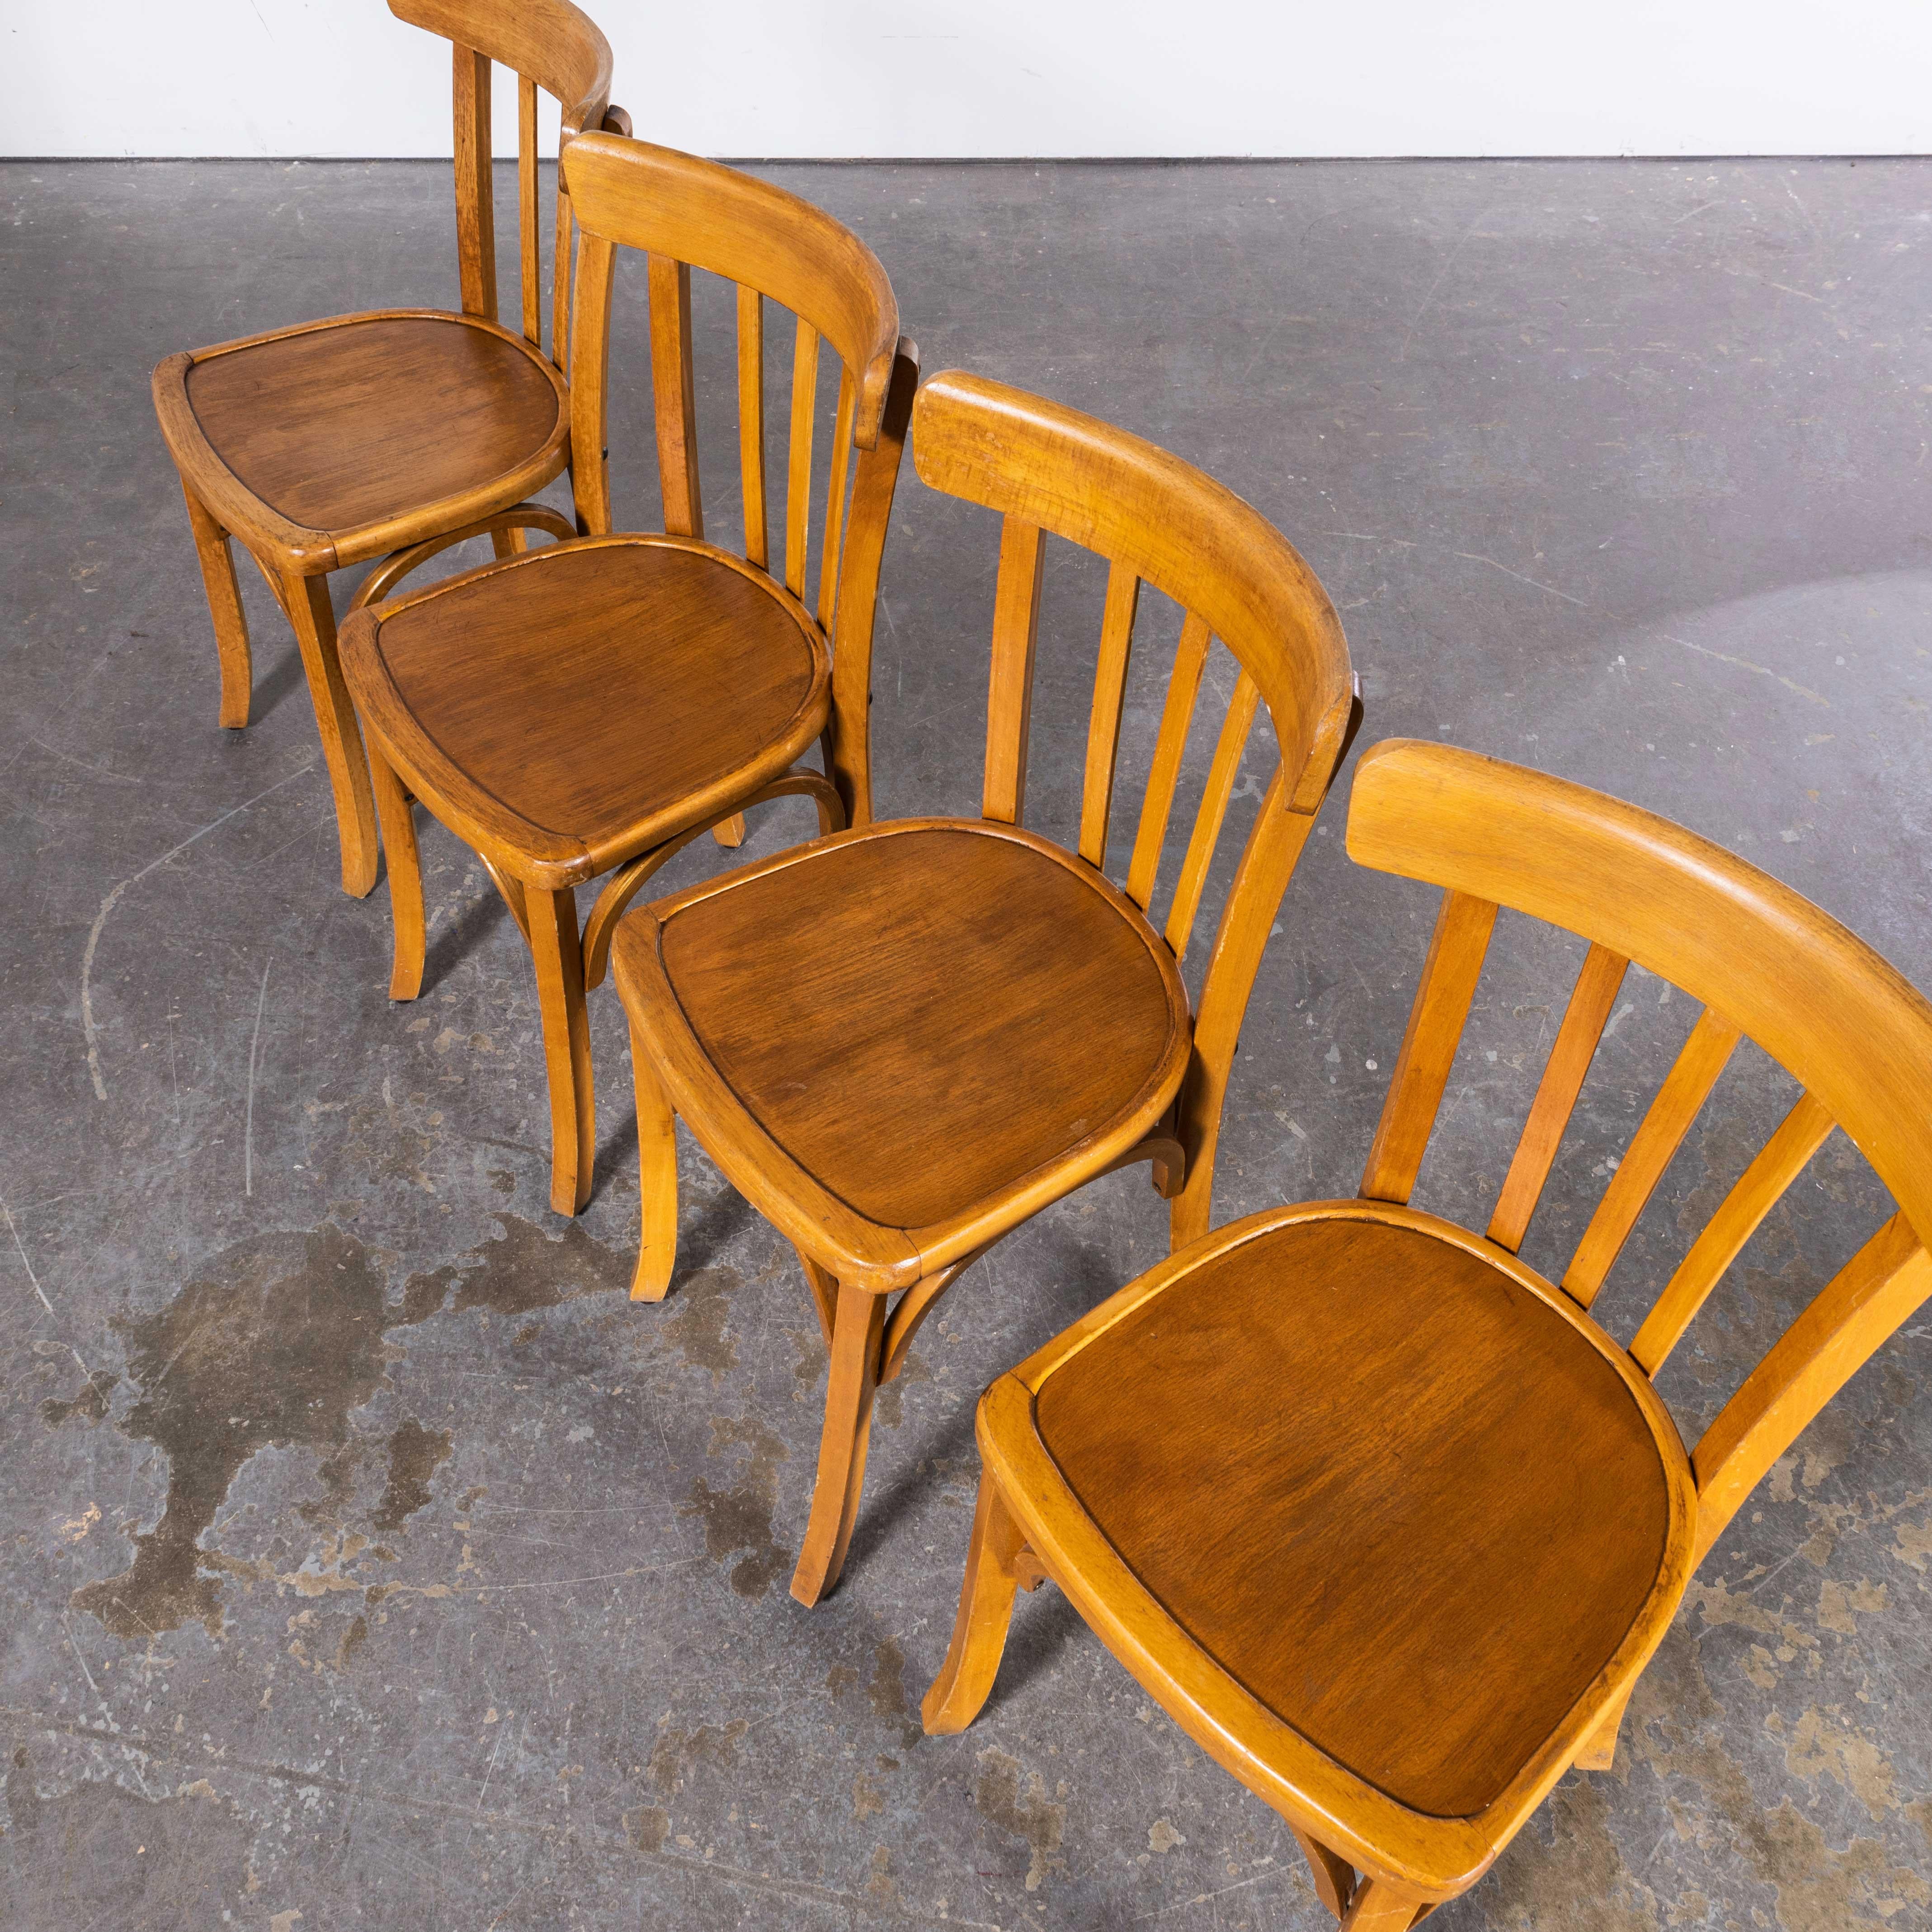 1950s Luterma Honey Oak Bentwood Dining Chair - Set of Four For Sale 3